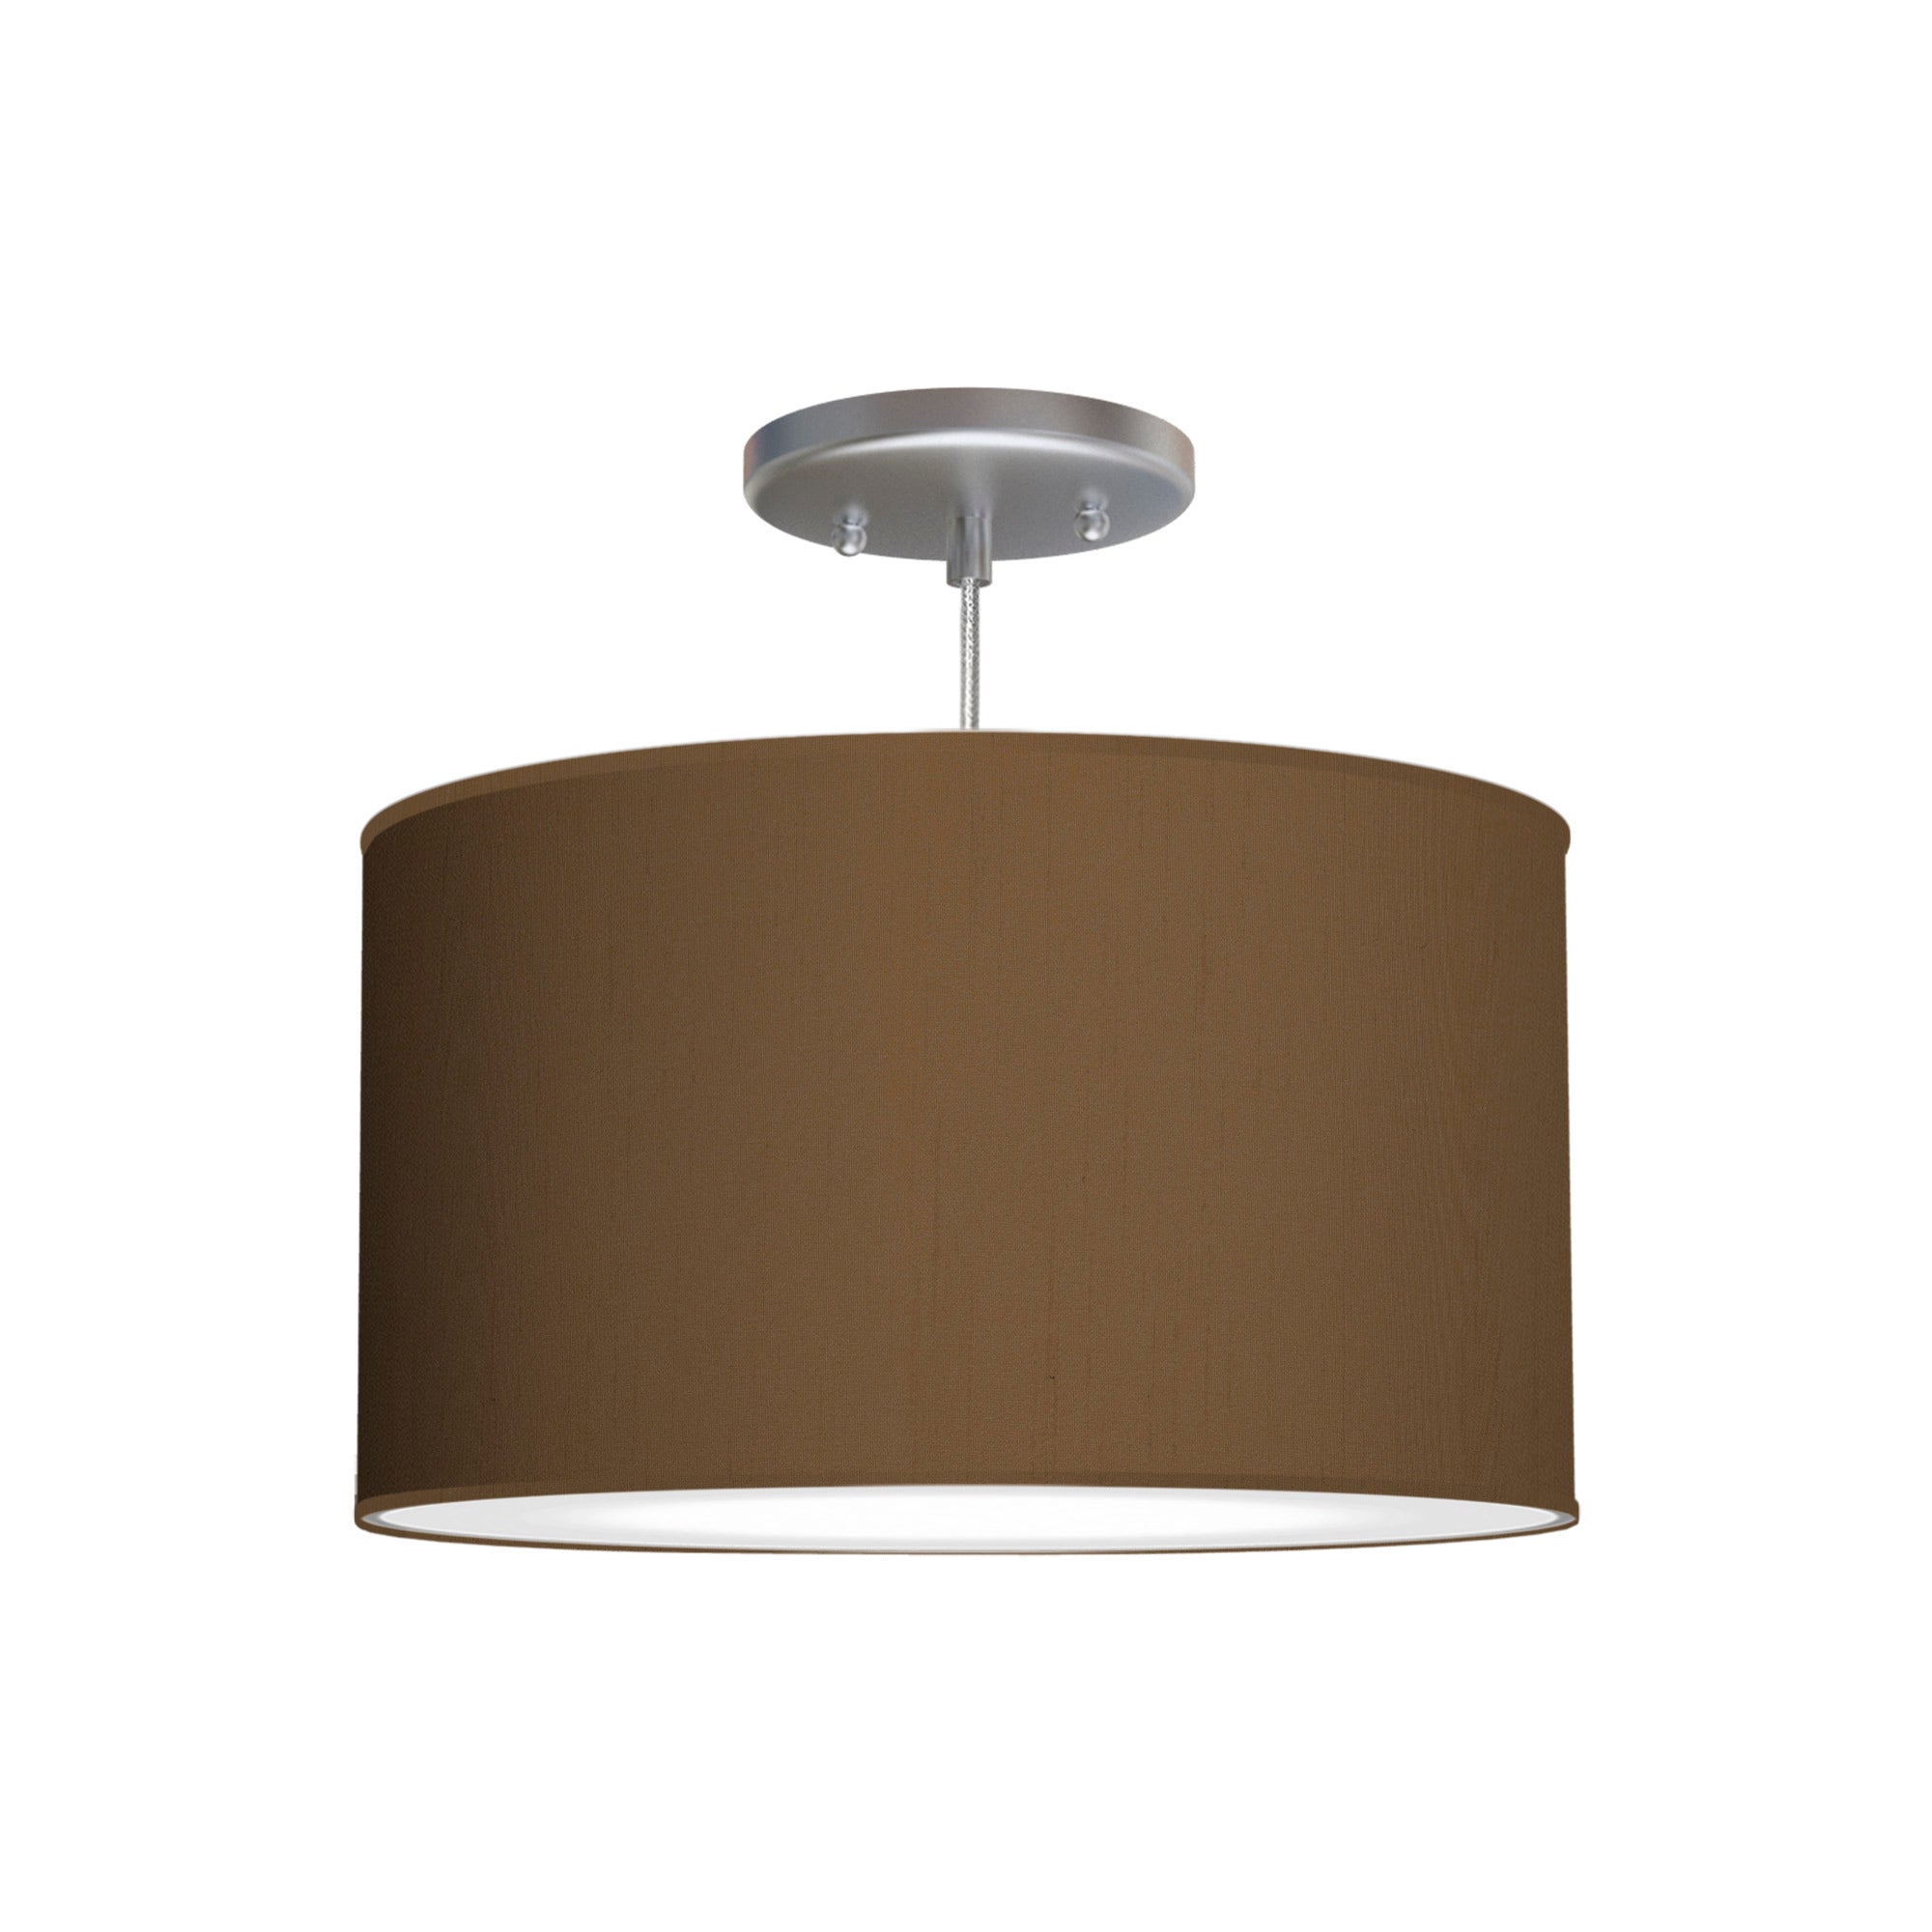 The Gab Hanging Lamp from Seascape Fixtures with a silk shade in chocolate color.